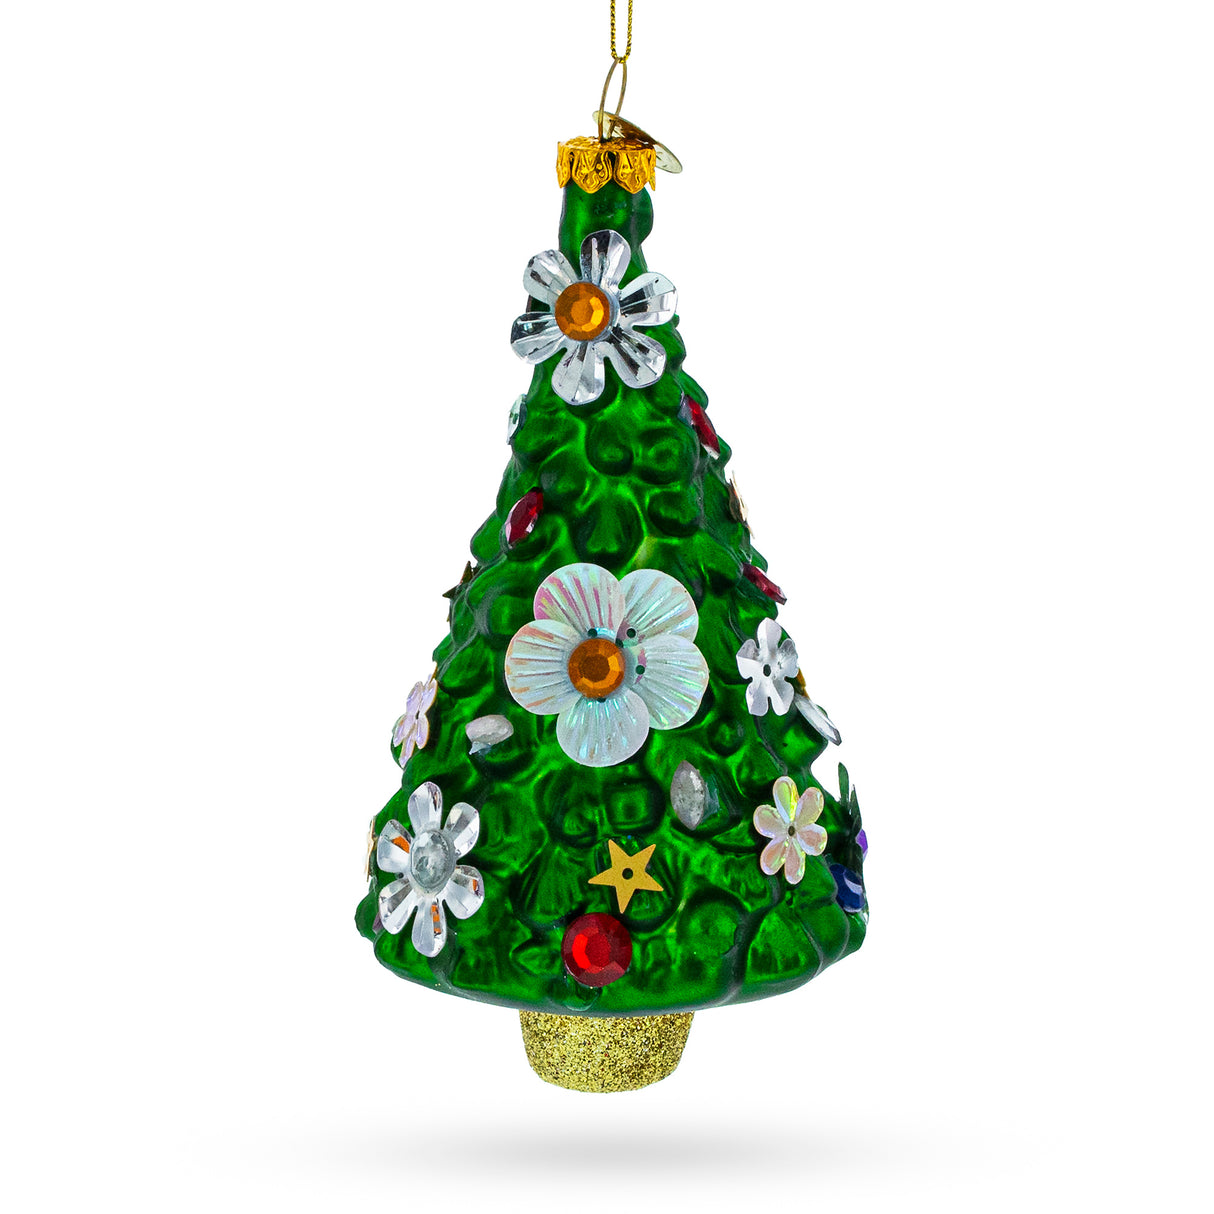 Floral Fiesta: Blossom-Adorned Christmas Tree - Blown Glass Ornament in Green color, Triangle shape